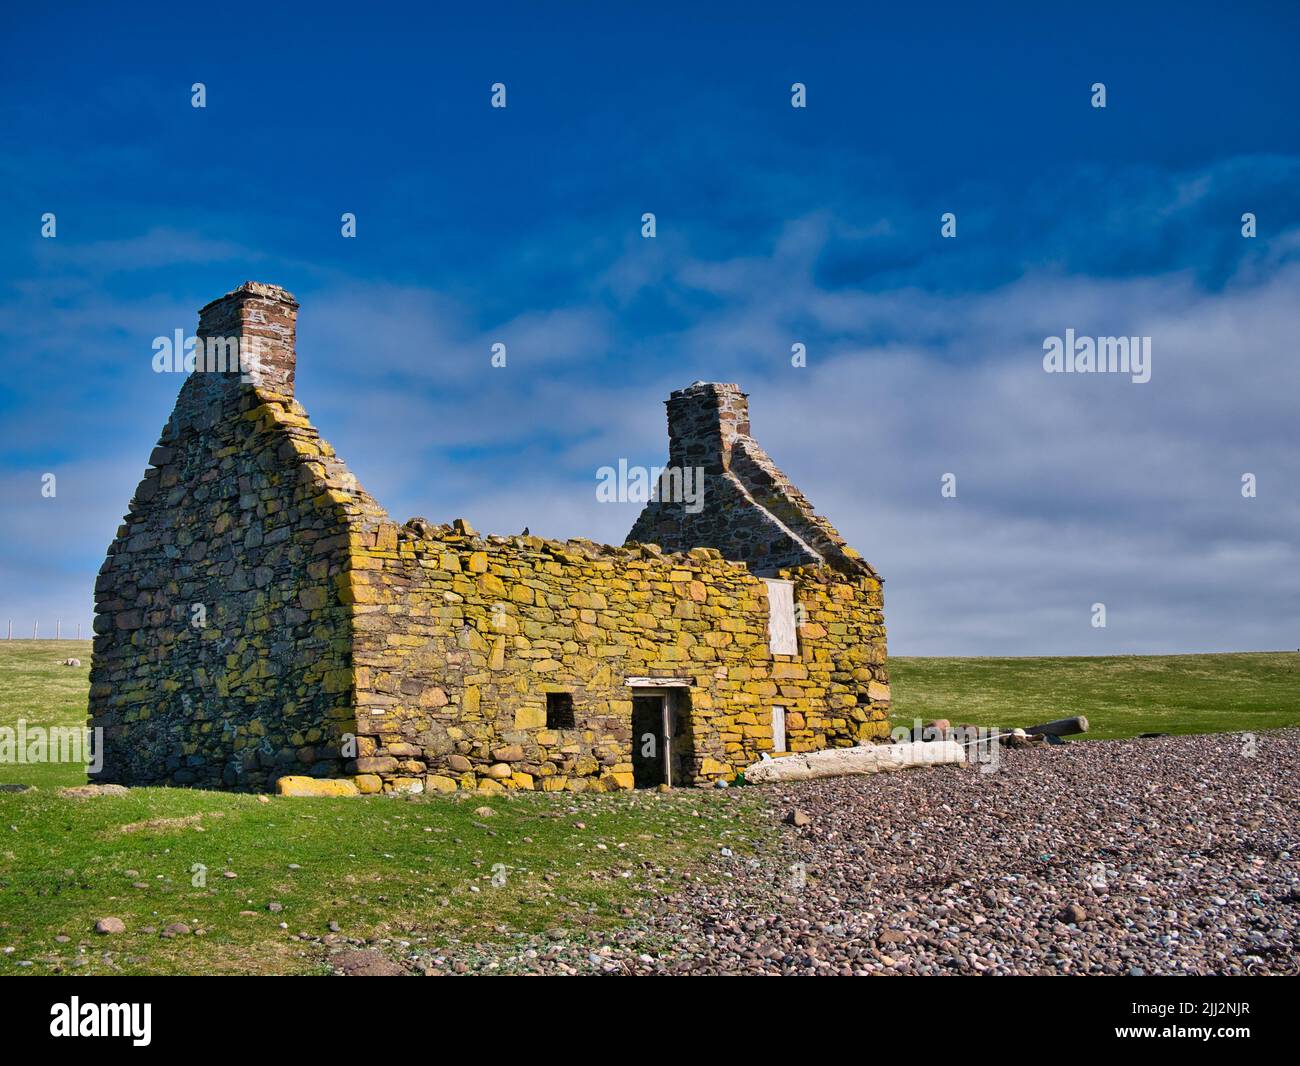 An abandoned, derelict croft or farm house with no roof on a pebble beach at Stenness, Northmavine in  Shetland, Scotland, UK. Stock Photo